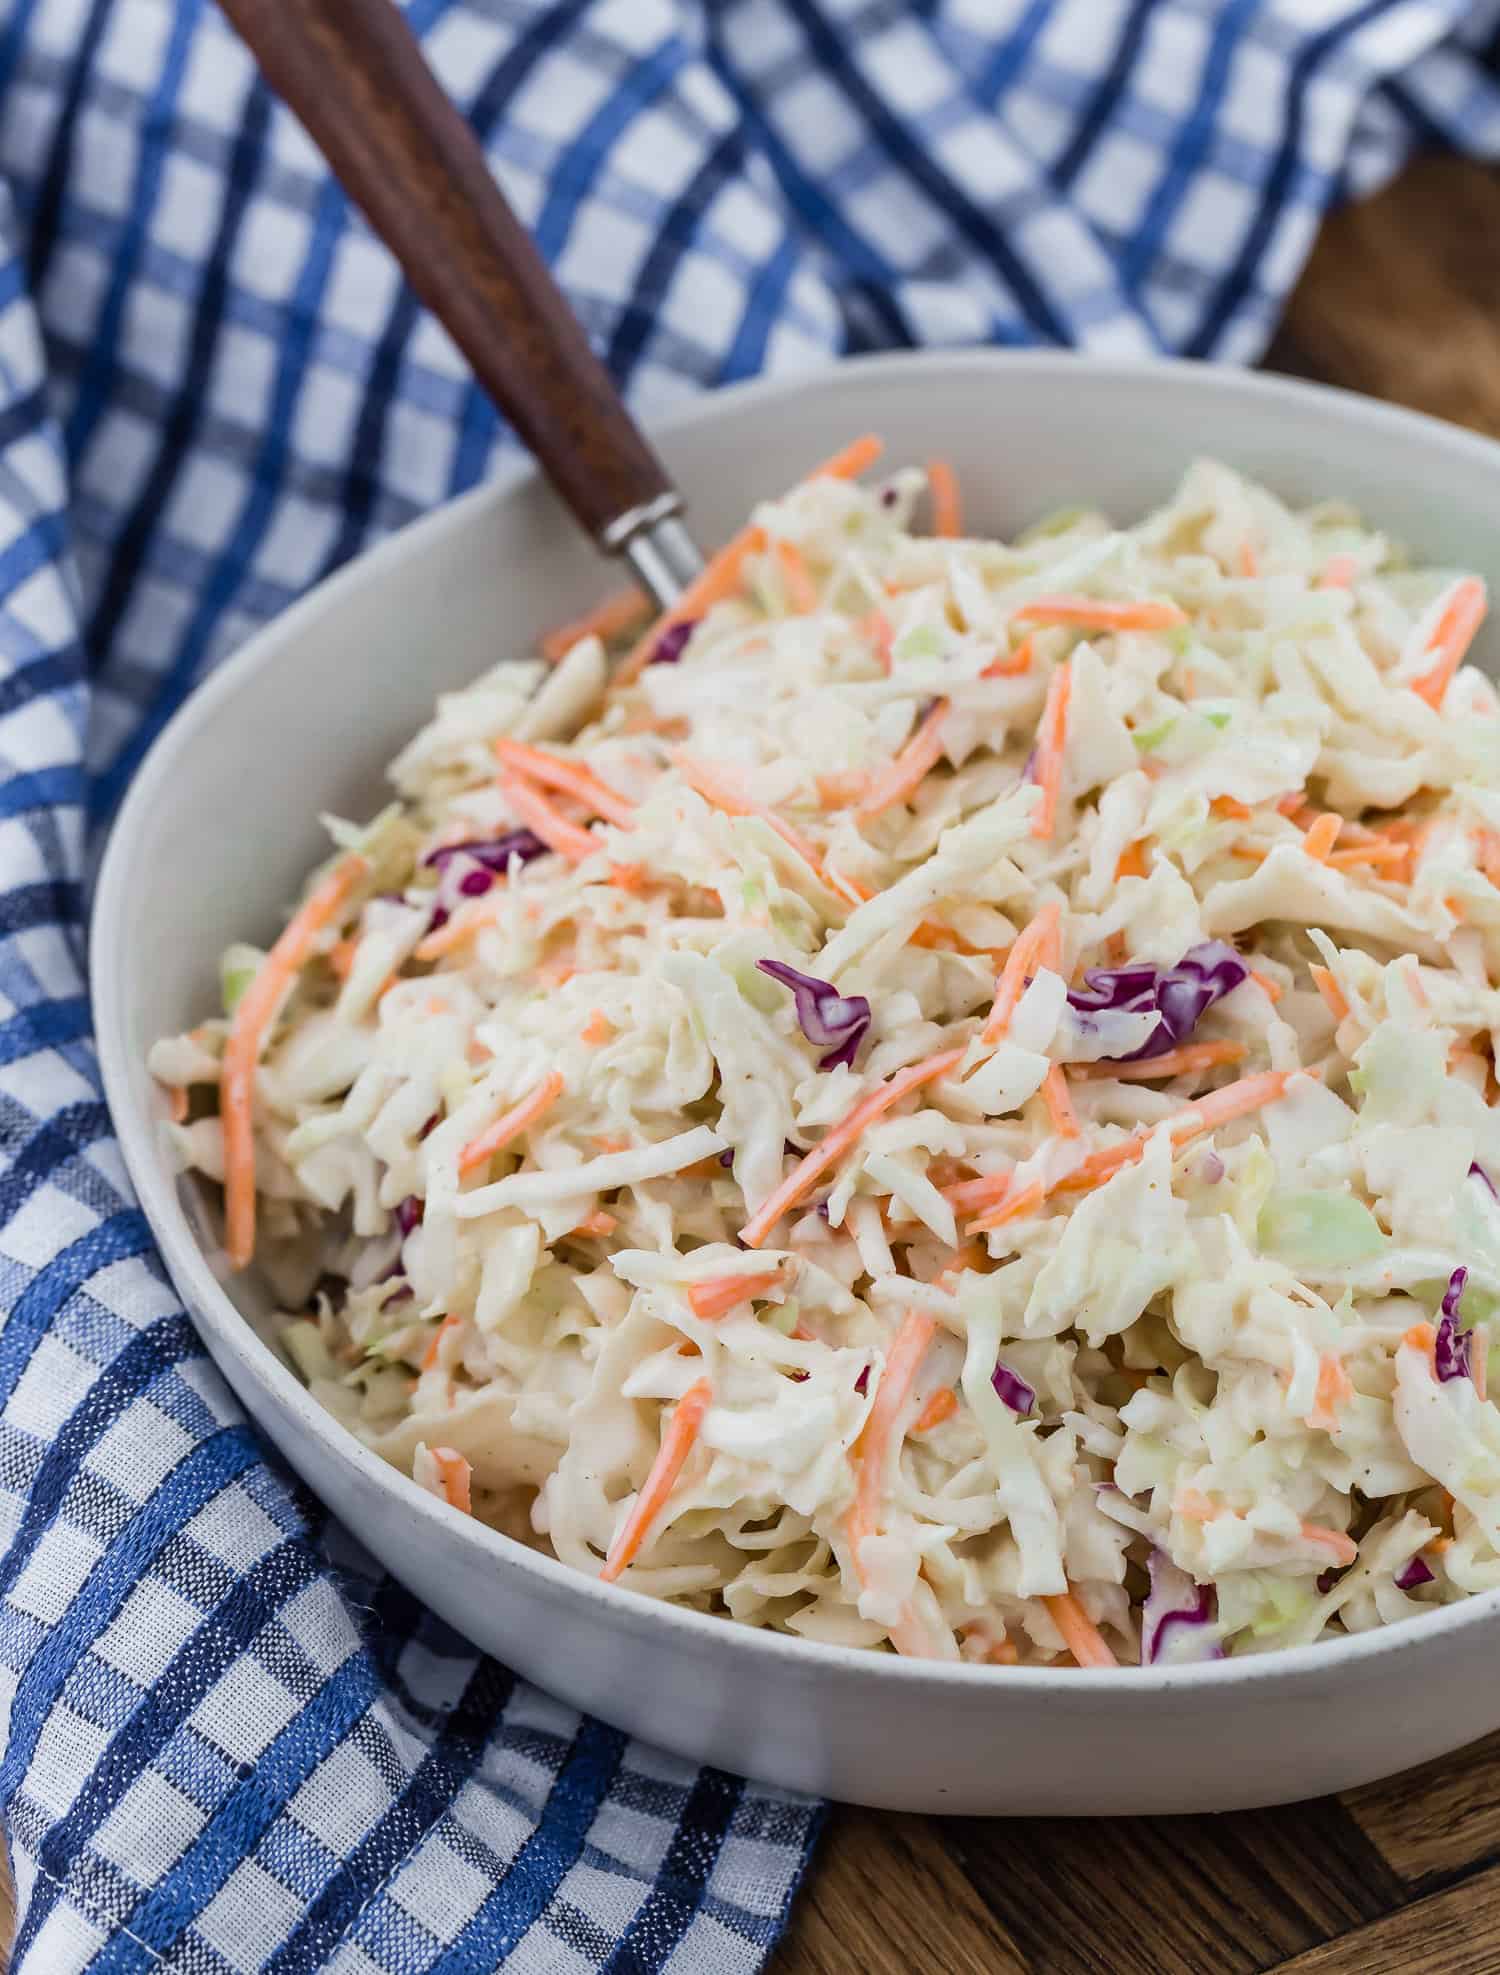 Creamy coleslaw with a wooden handled spoon.